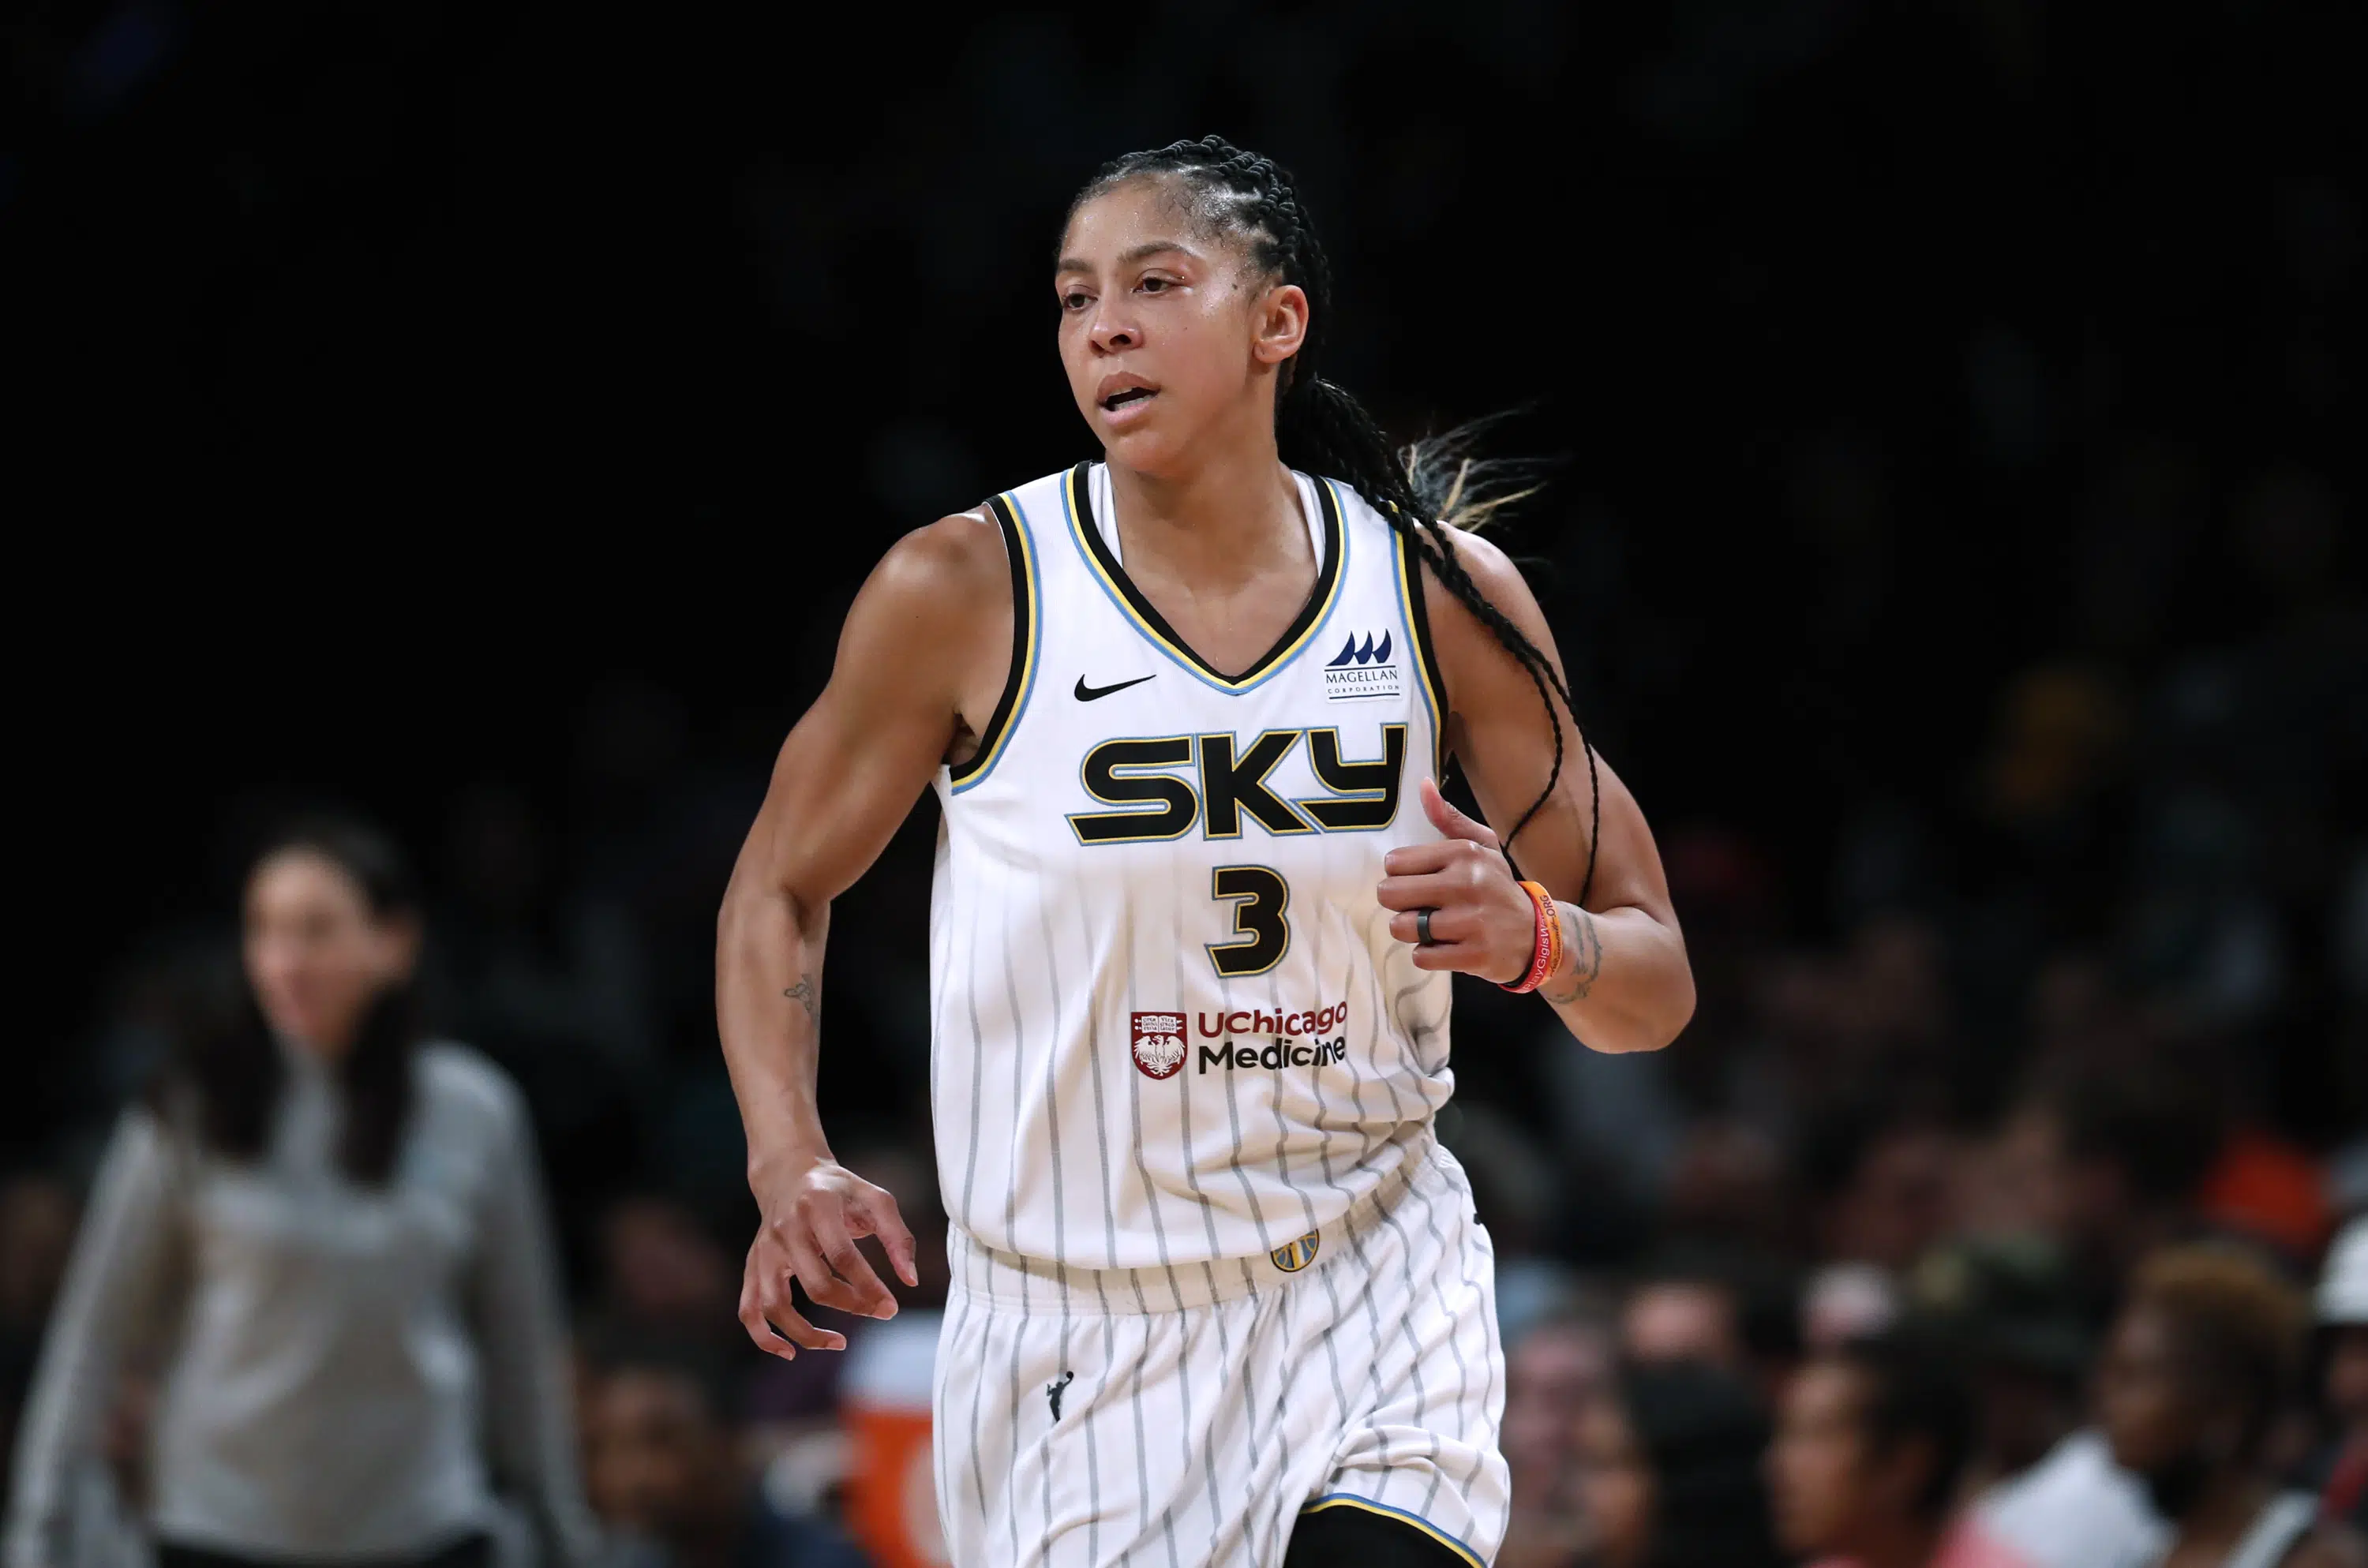 Recruiting connection helped land Candace Parker in Vegas | AP News